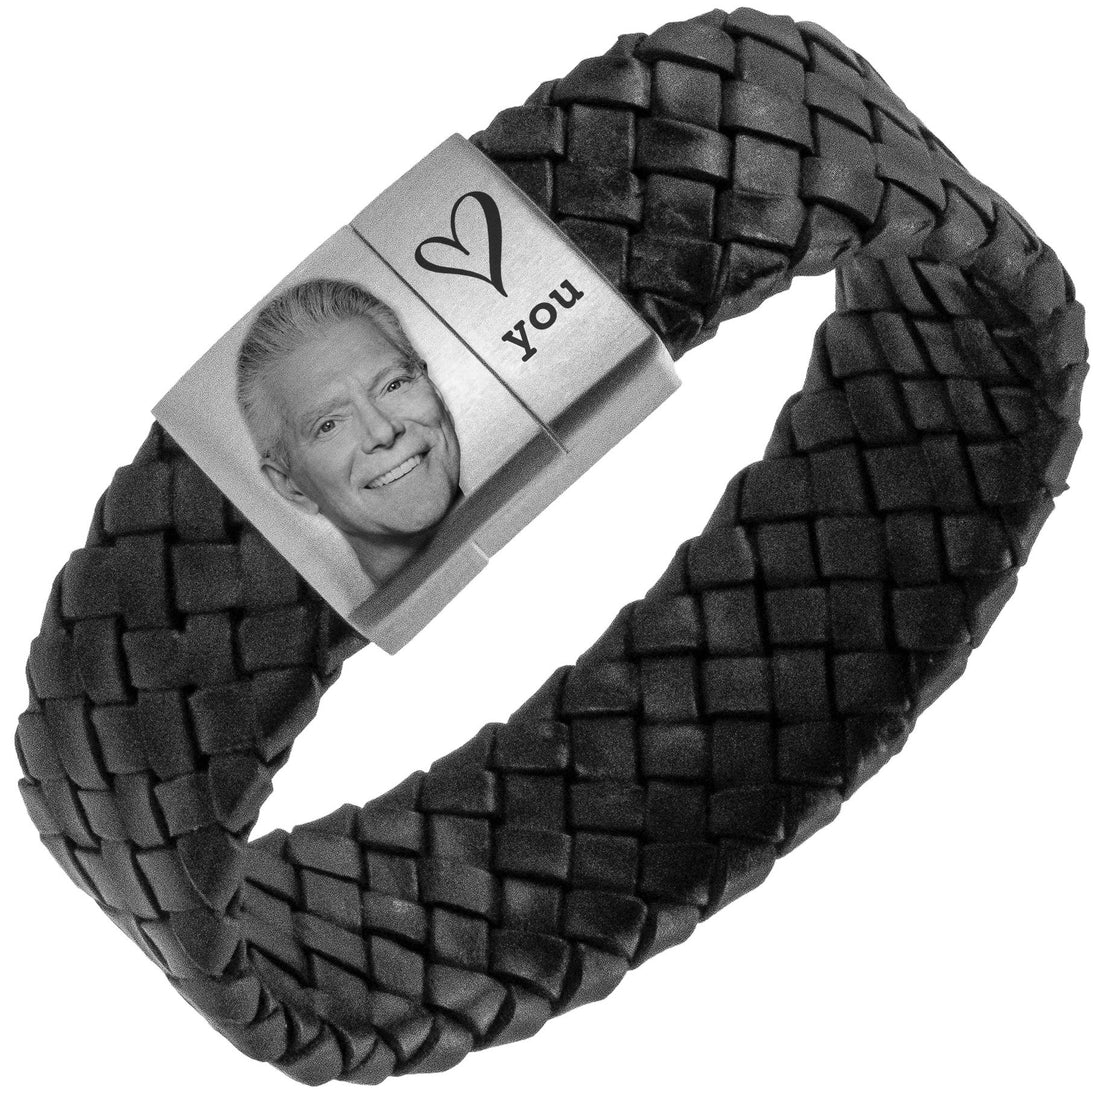 Photo bracelet with your own image - brown Braided leather bracelet with photo engraving